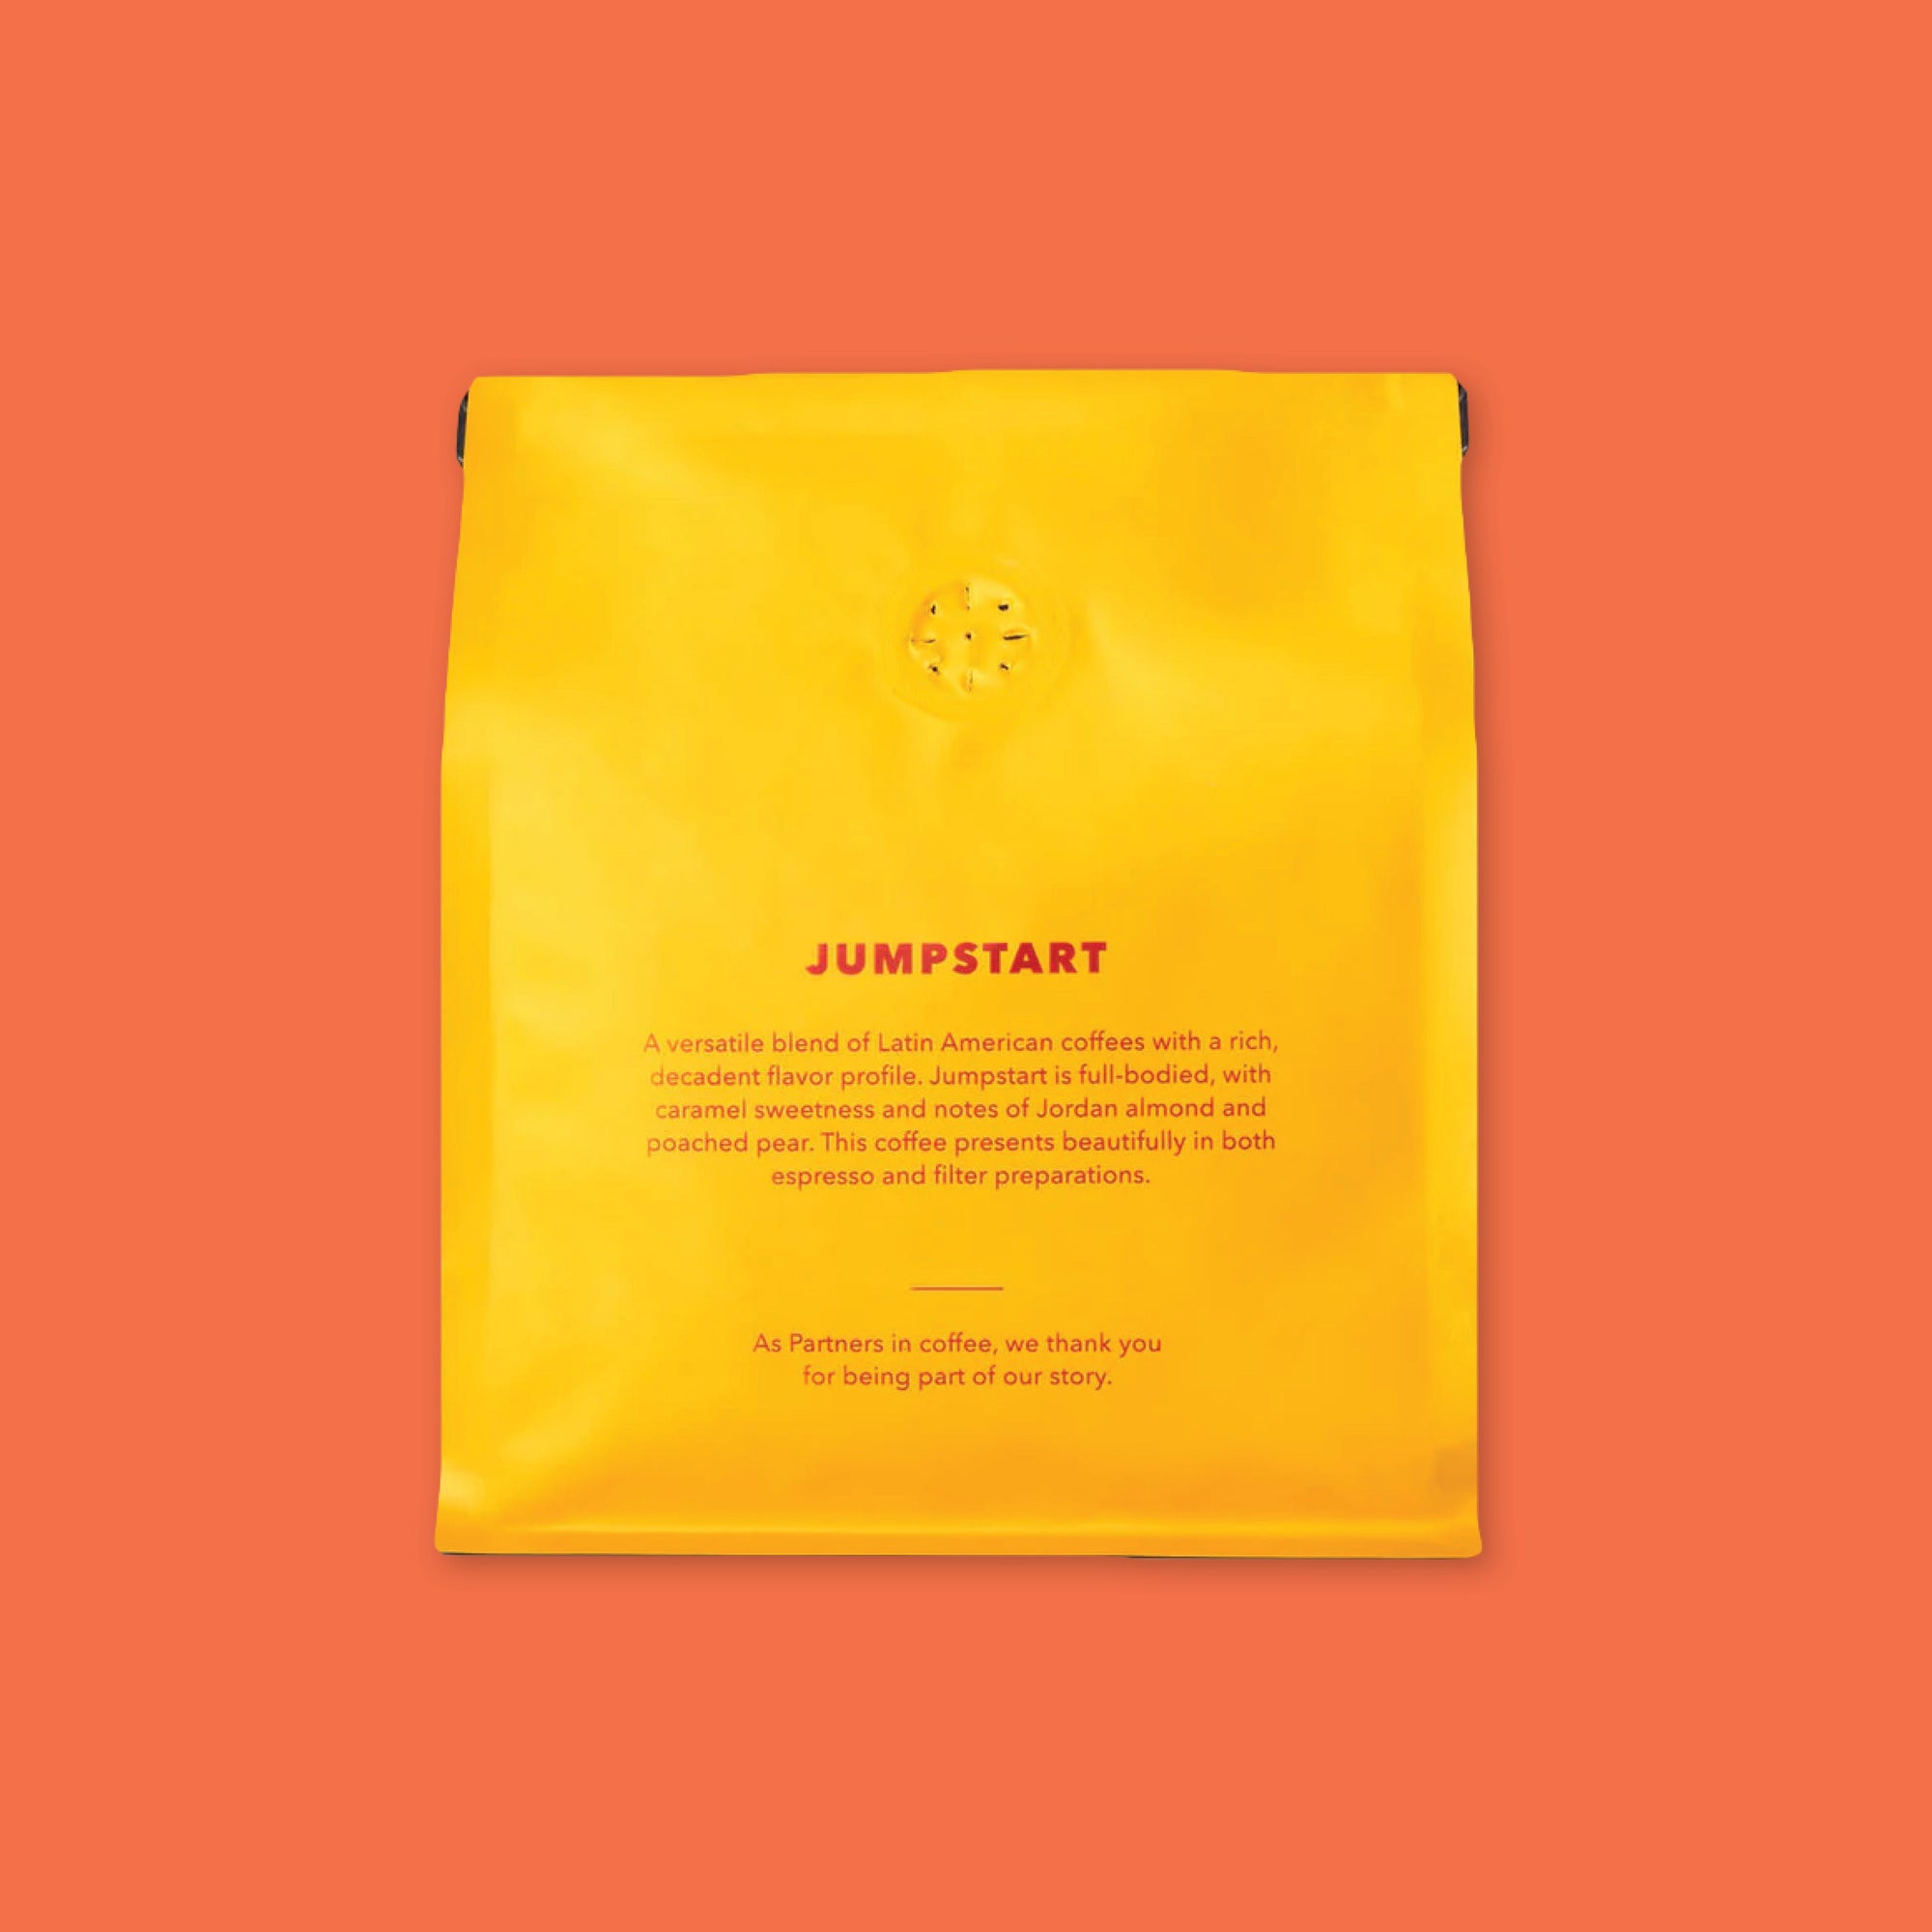 On an orangey-red background is a photo of the back of a yellow bag of Partners Coffee Roasters Jumpstart Blend. In red font reads "Jumpstart: A versitile blend of Latin American coffees with a rich, decadent flavor profile. Jumpstart is full-bodied, with caramel sweetness and notes of Jordan almond and poached pear. The coffee presents beautifully in both espresso and filtered preparations. As partners in coffee, we thank you for being part of our story."